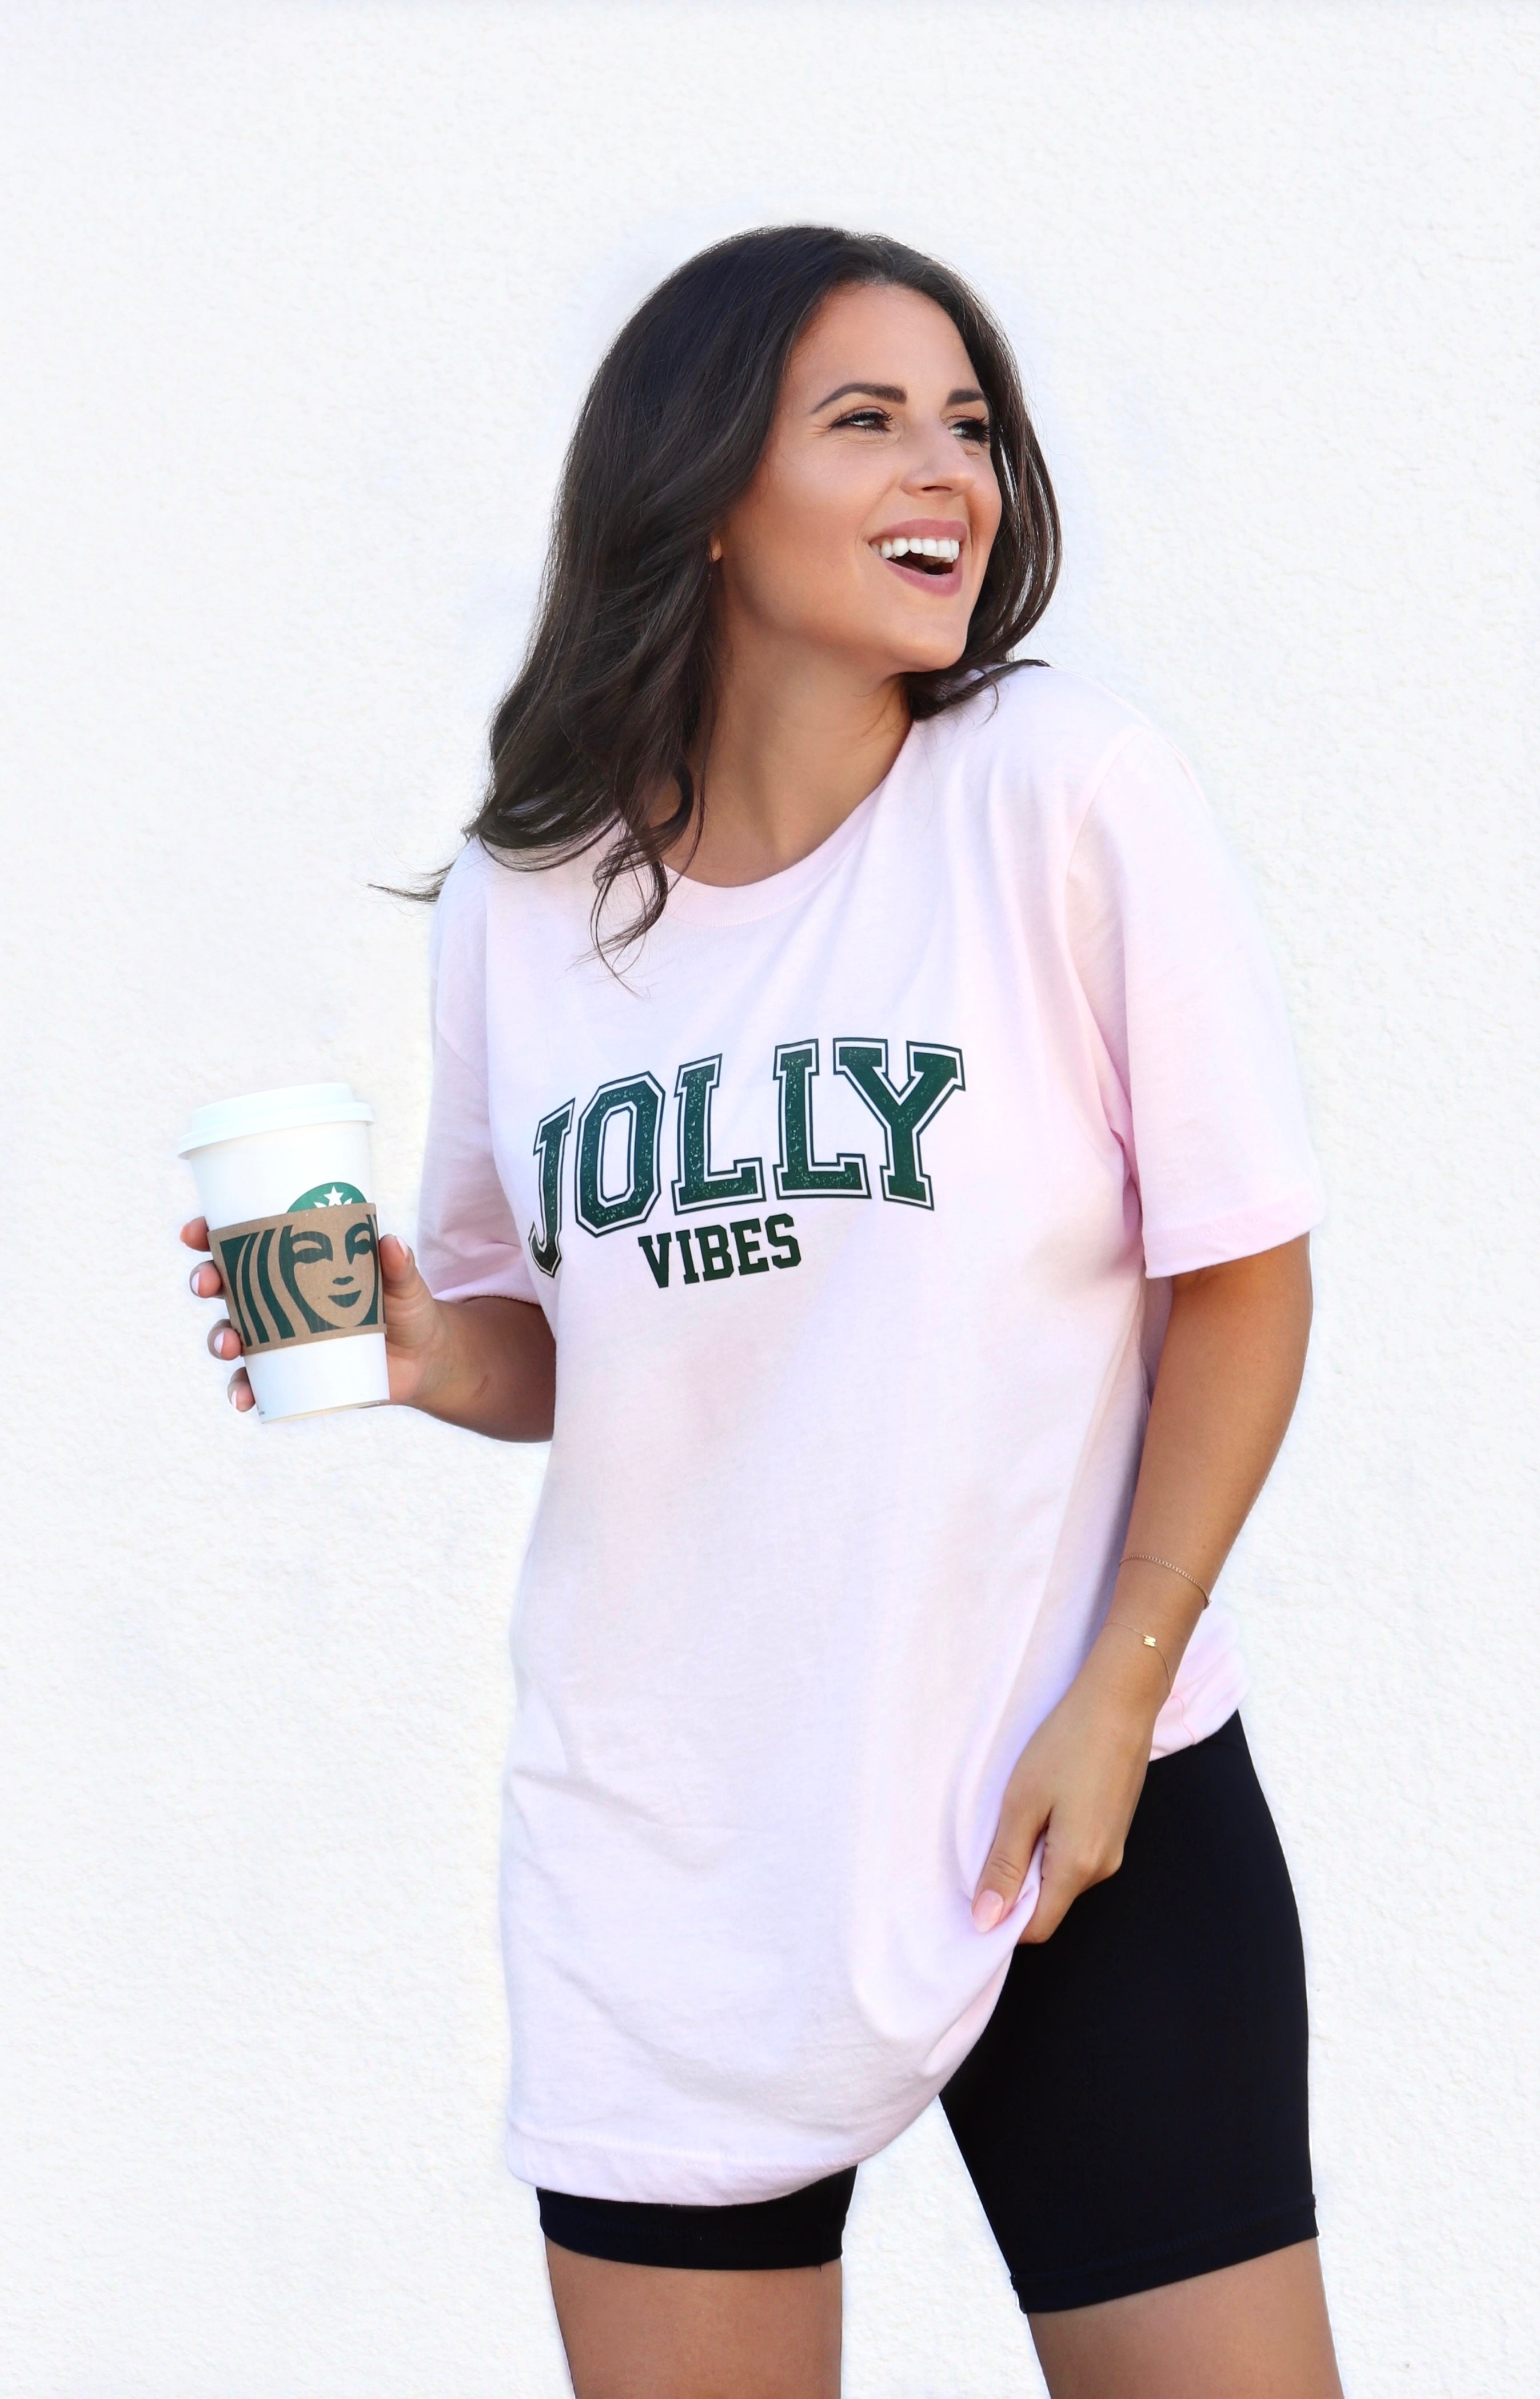 MUST SHIP - JOLLY VIBES TEE (BELLA CANVAS)